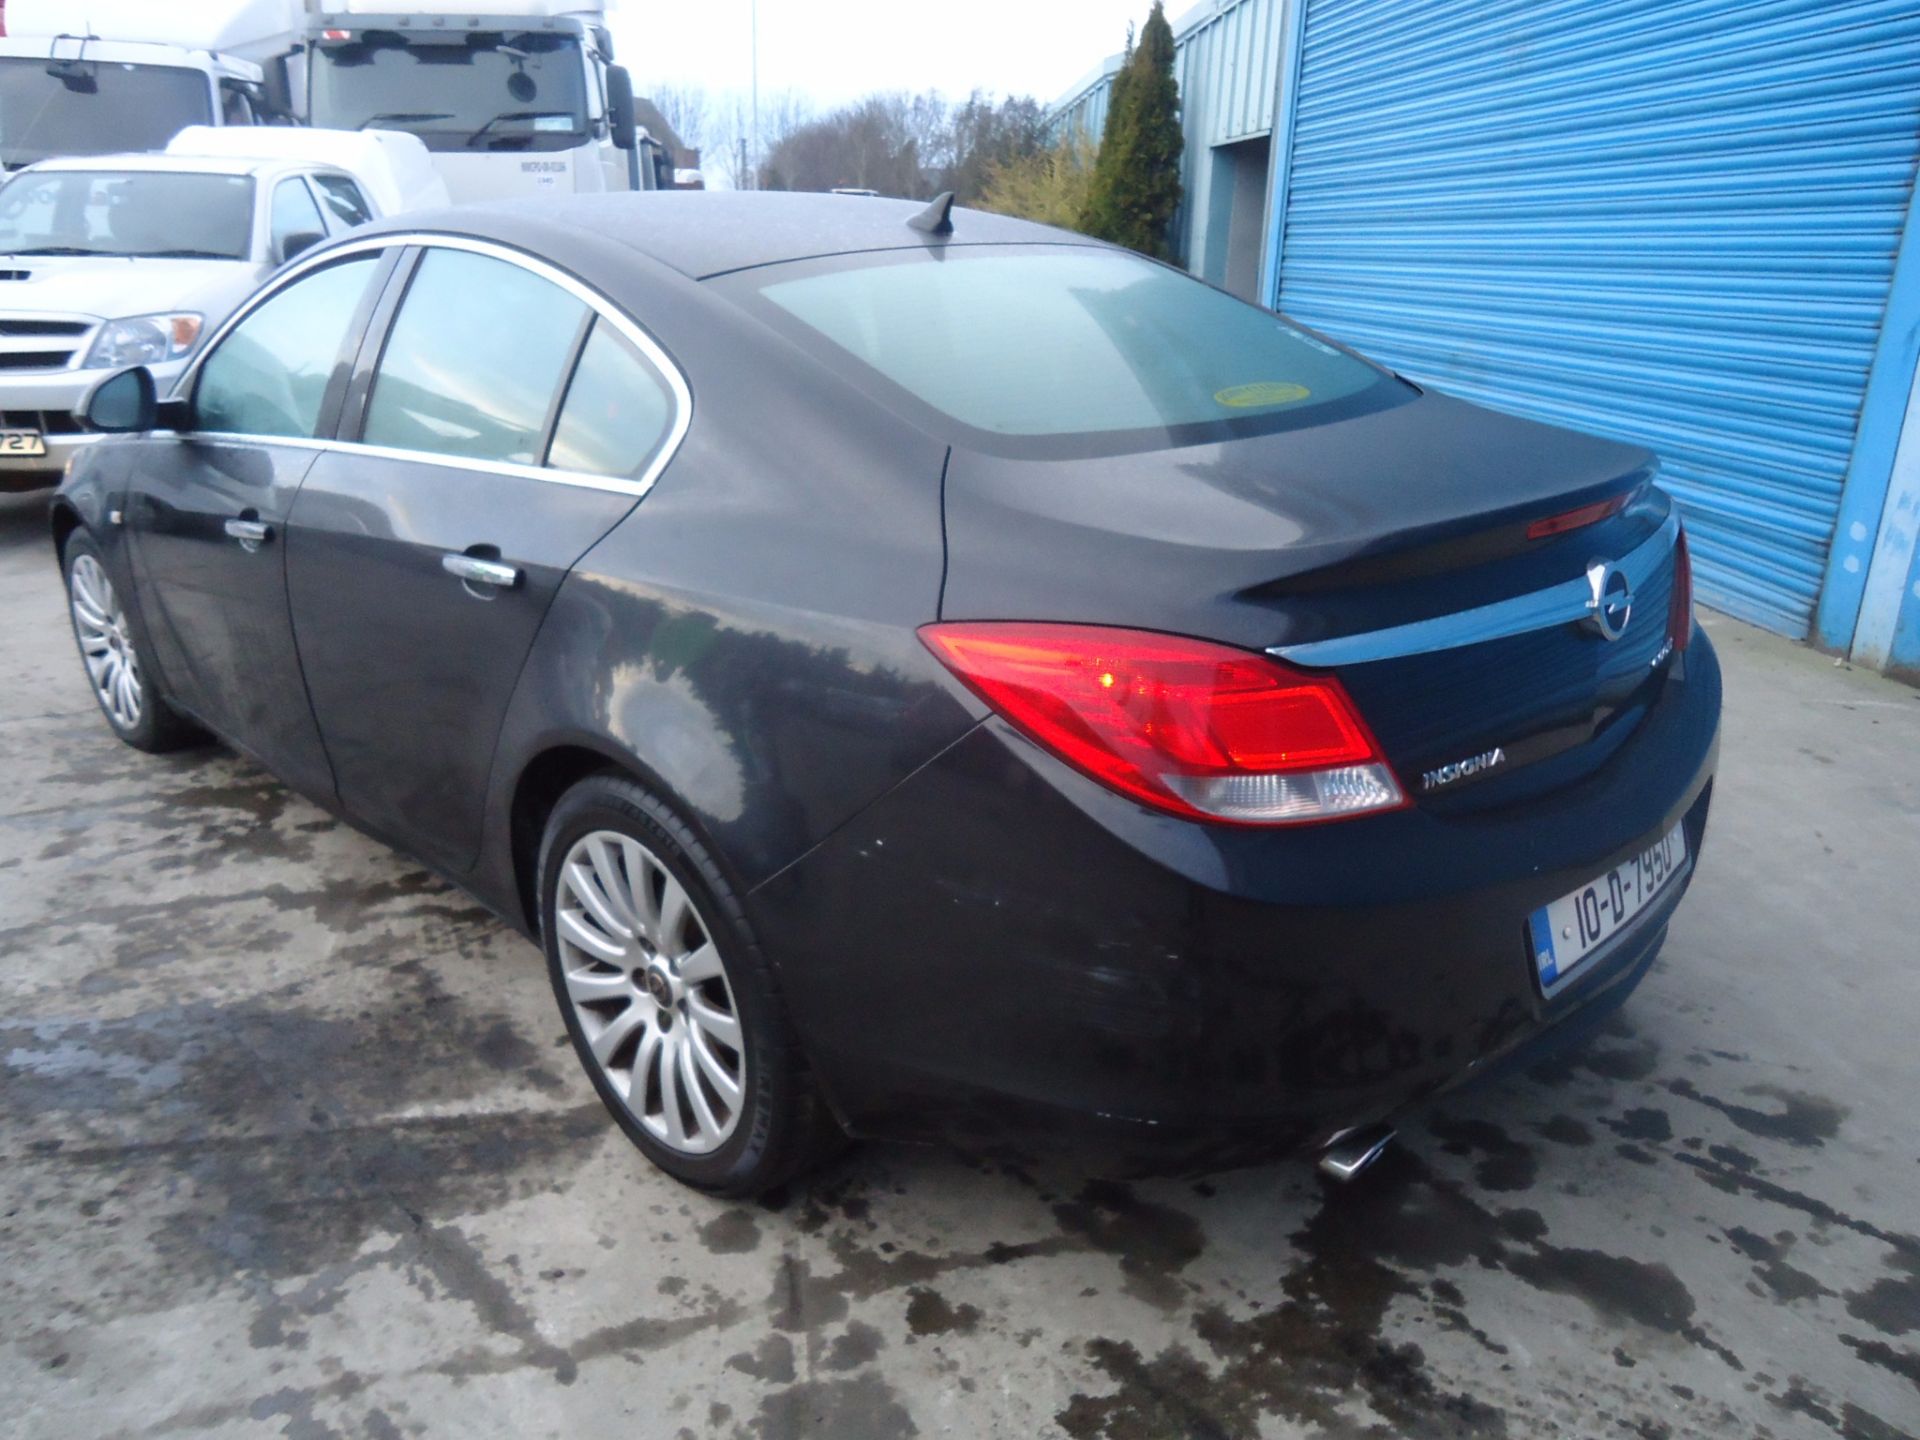 10D7950 Opel Insignia - Image 4 of 6